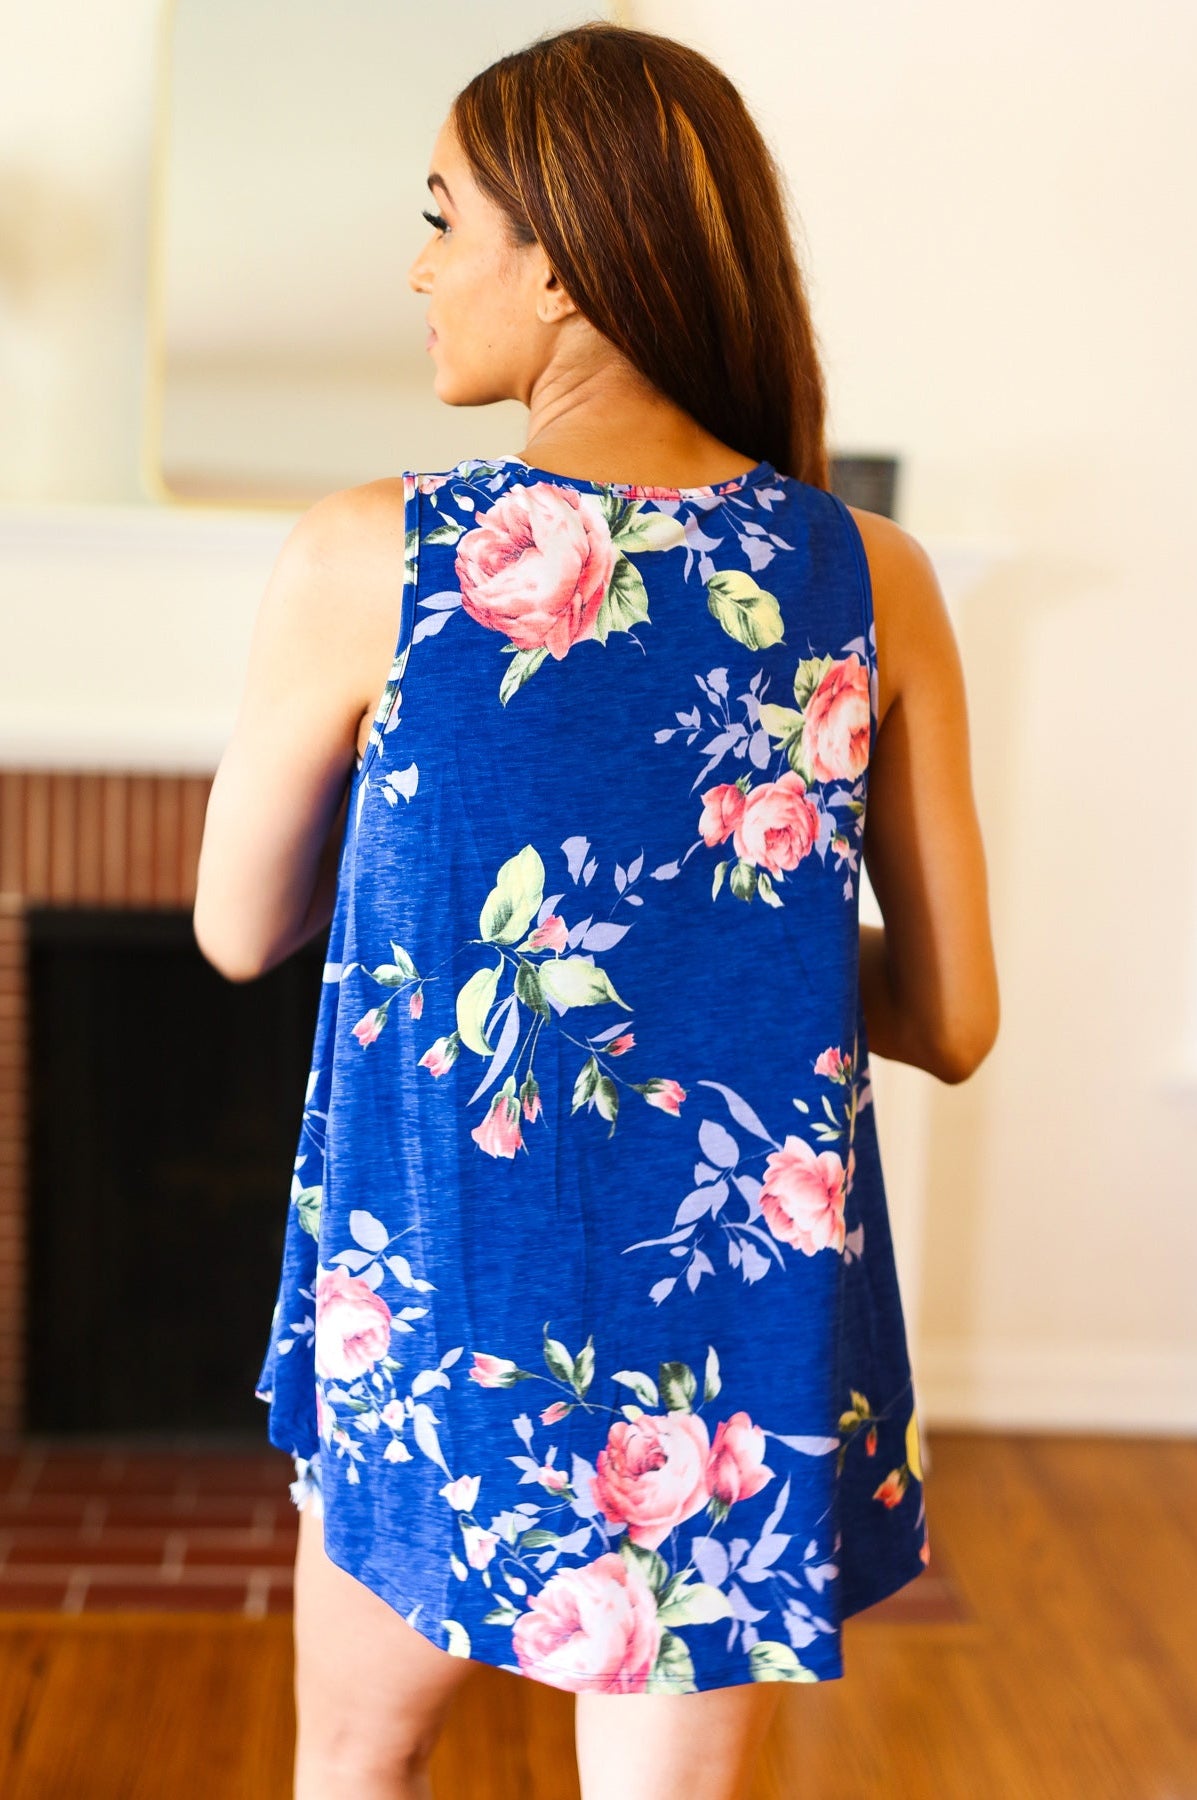 Sunny Days Navy Blue Floral Print Sleeveless Top Beeson River